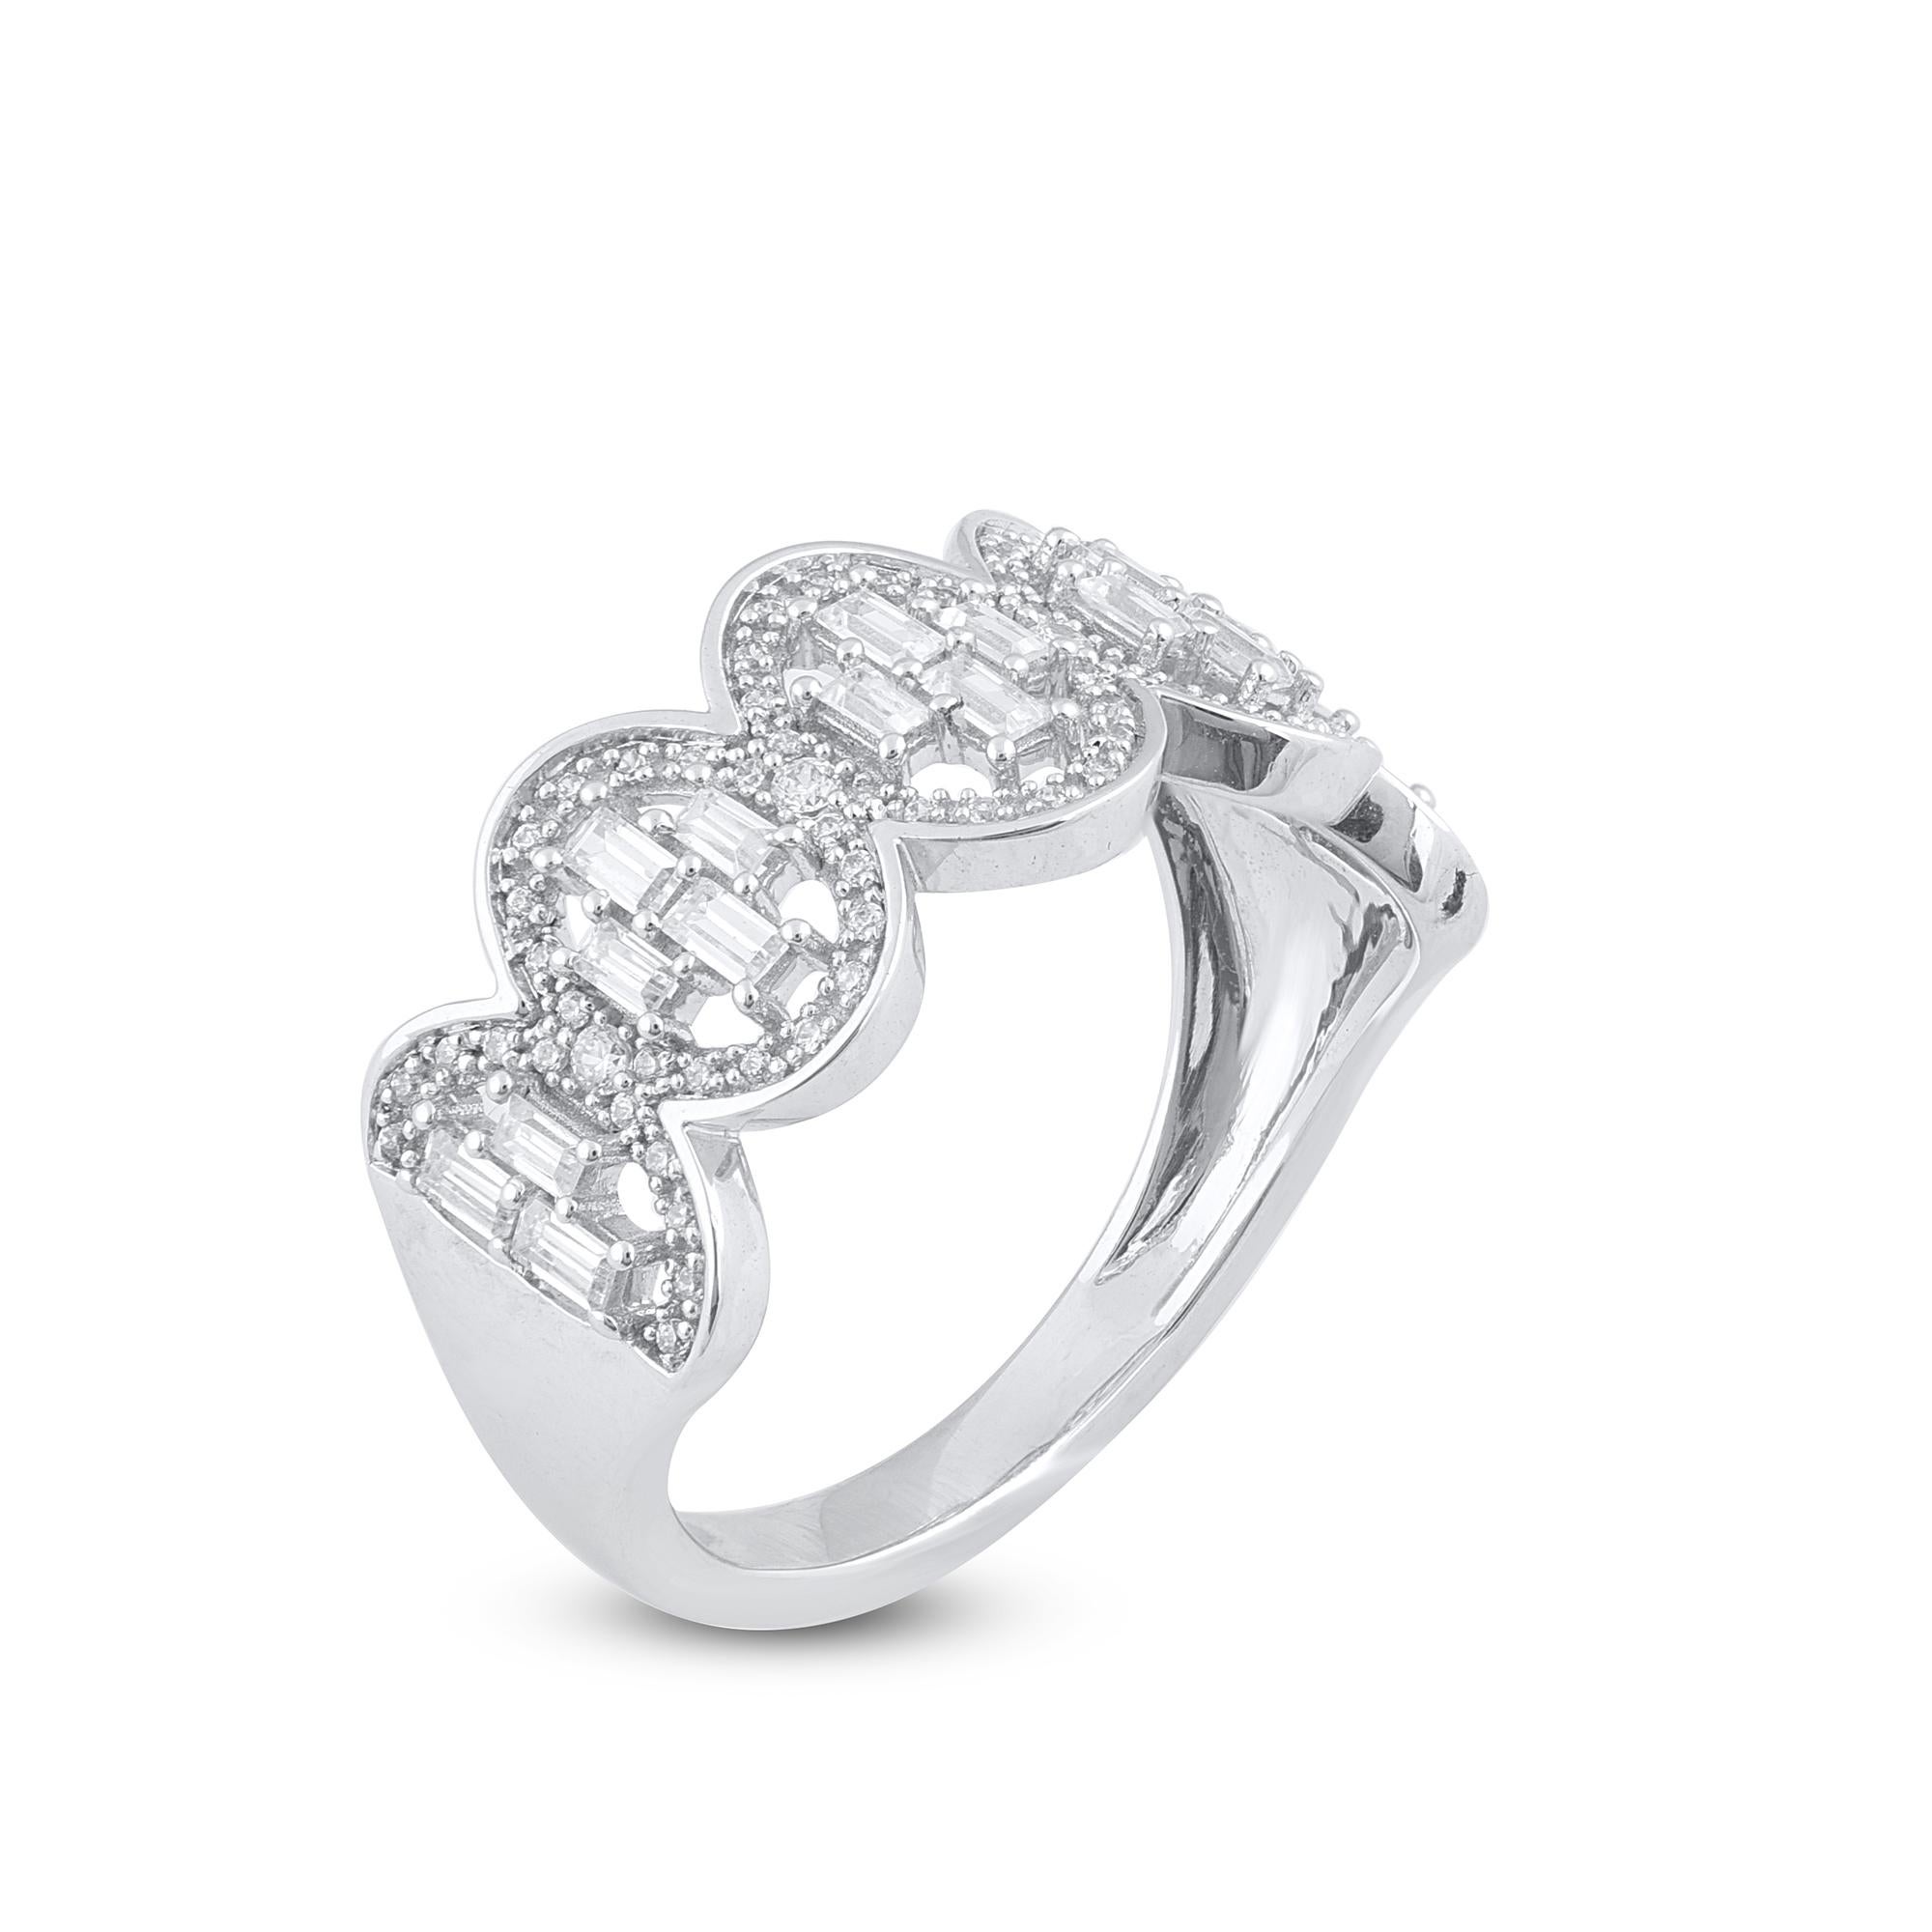 Bring charm to your look with this diamond ring. The ring is crafted from 14-karat gold in your choice of white, rose, or yellow, and features Round Brilliant 72 and Baguette - 18 white diamonds, Pave & prong set, H-I color I2 clarity and a high